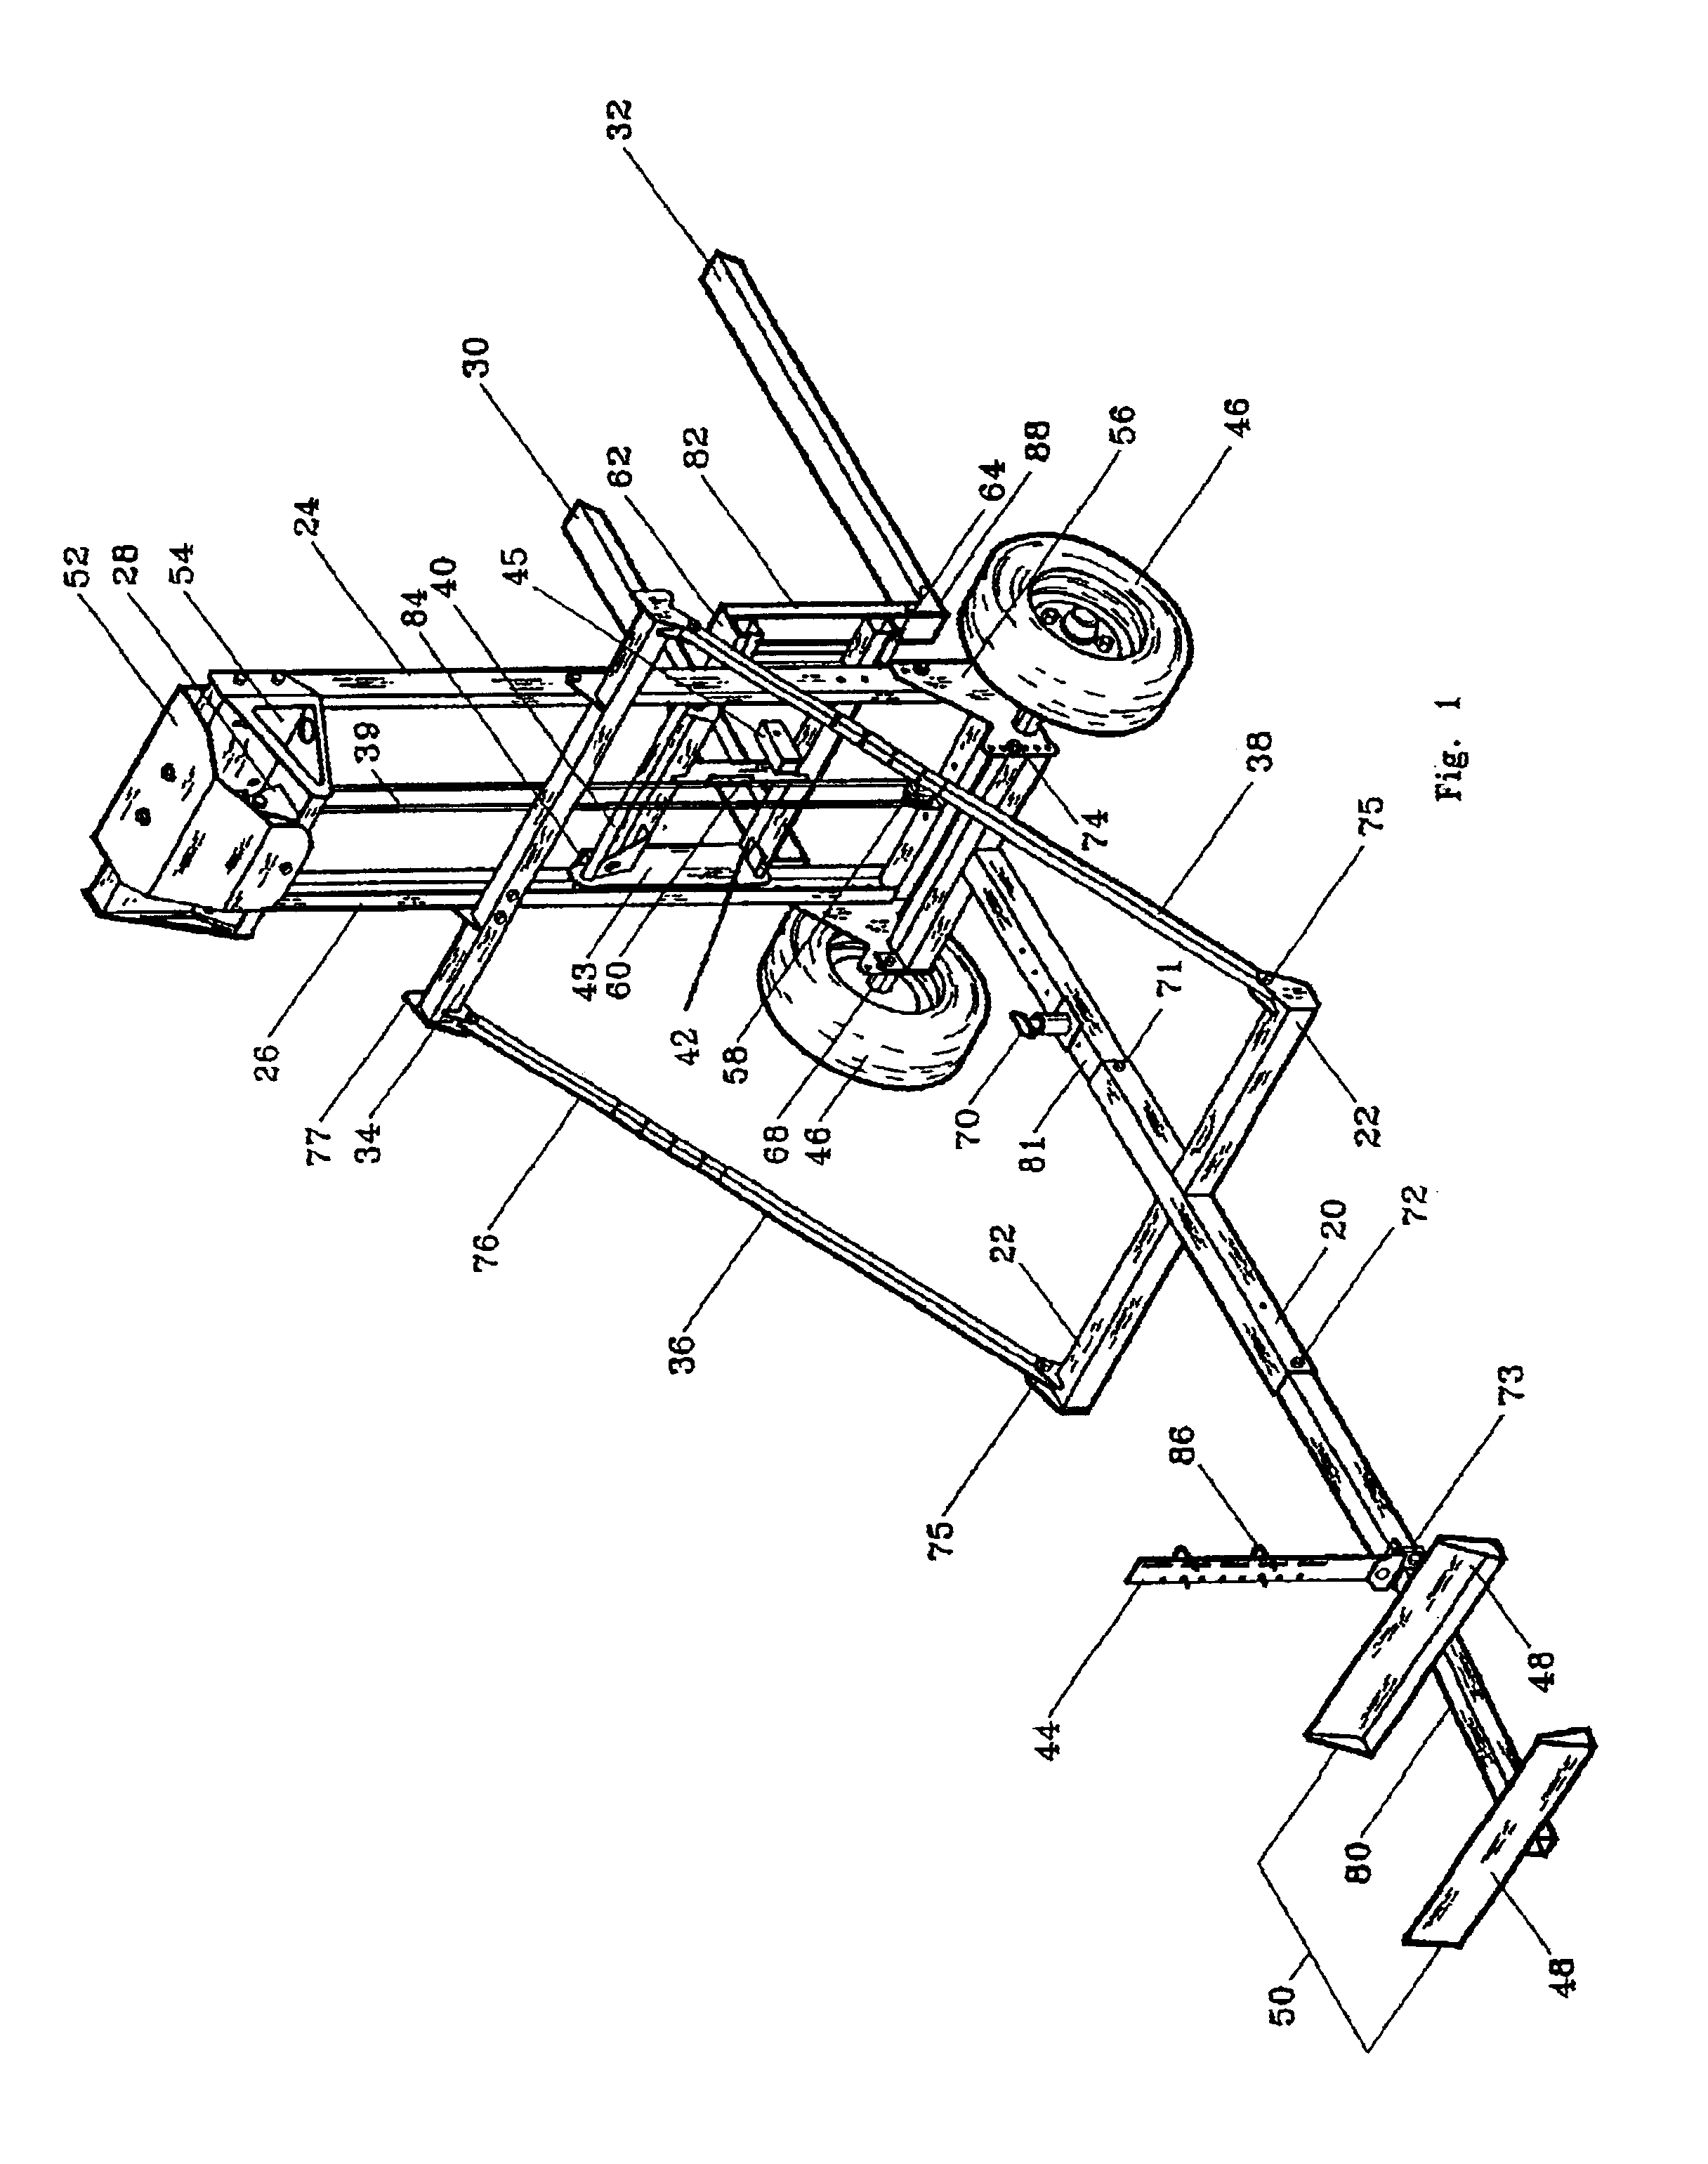 Multi-purpose load bearing assembly for all terrain vehicle (ATV)